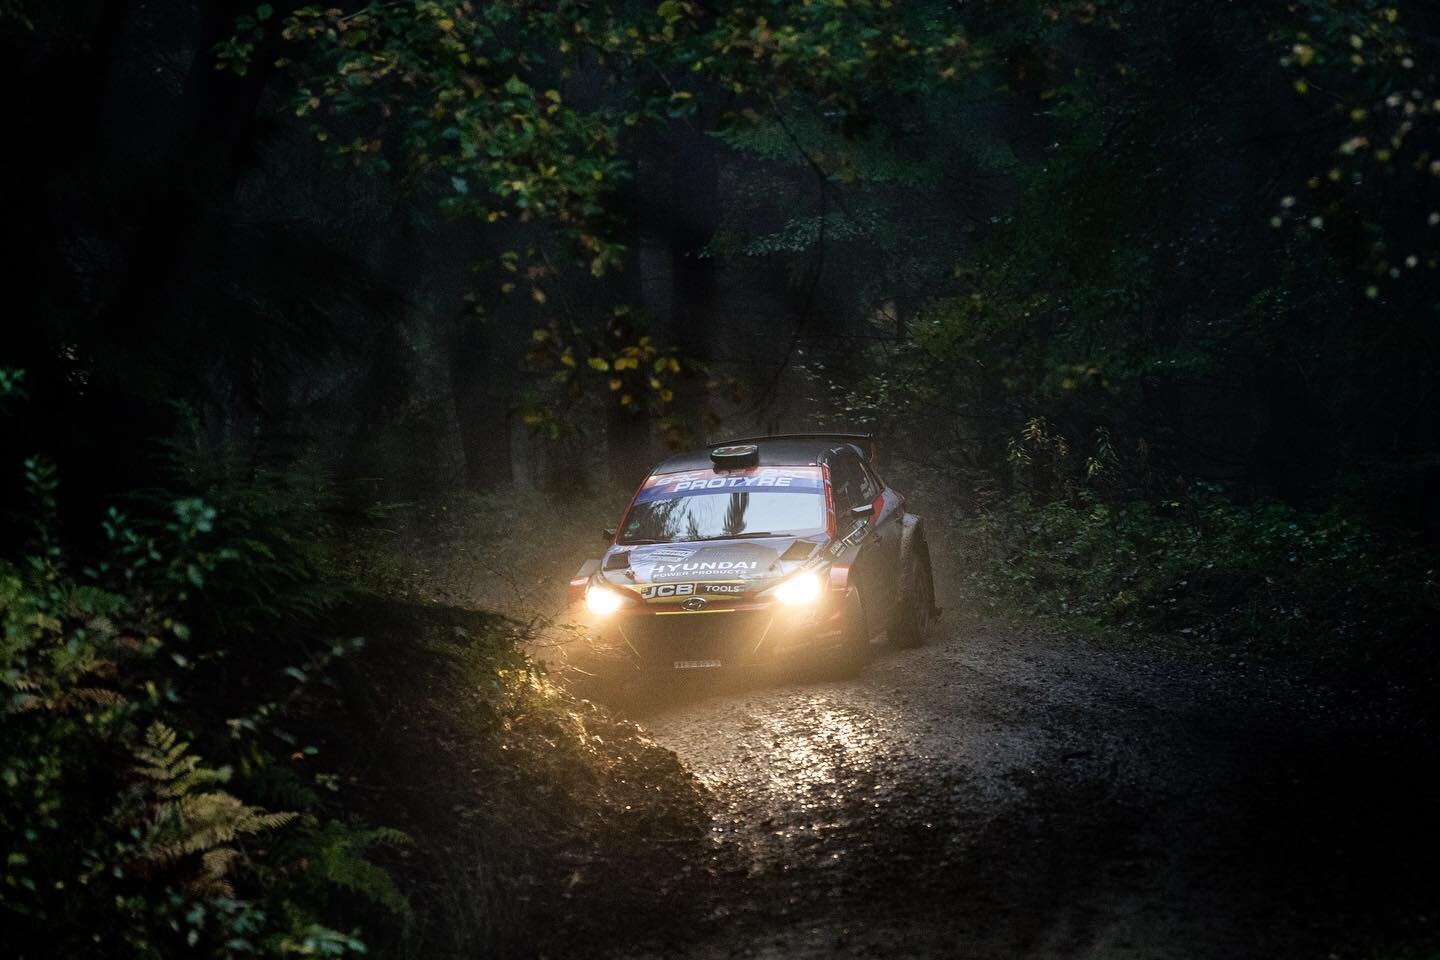 @jwrallying SS3 of the Visit Conwy Cambrian Rally |British Rally Championship ⠀⠀⠀⠀⠀⠀⠀⠀⠀⠀⠀⠀⠀⠀⠀⠀⠀⠀⠀⠀⠀⠀⠀⠀⠀⠀⠀⠀⠀⠀⠀⠀⠀⠀⠀⠀⠀⠀⠀⠀⠀⠀⠀⠀⠀⠀⠀⠀⠀⠀⠀⠀⠀⠀⠀⠀⠀⠀⠀⠀⠀⠀⠀⠀⠀⠀⠀⠀⠀⠀⠀⠀⠀⠀⠀⠀⠀⠀⠀⠀⠀

#canonphotography #canoncamera #brc #rally #r5 #walesrally @canonuk @canonemeapro @ourmot